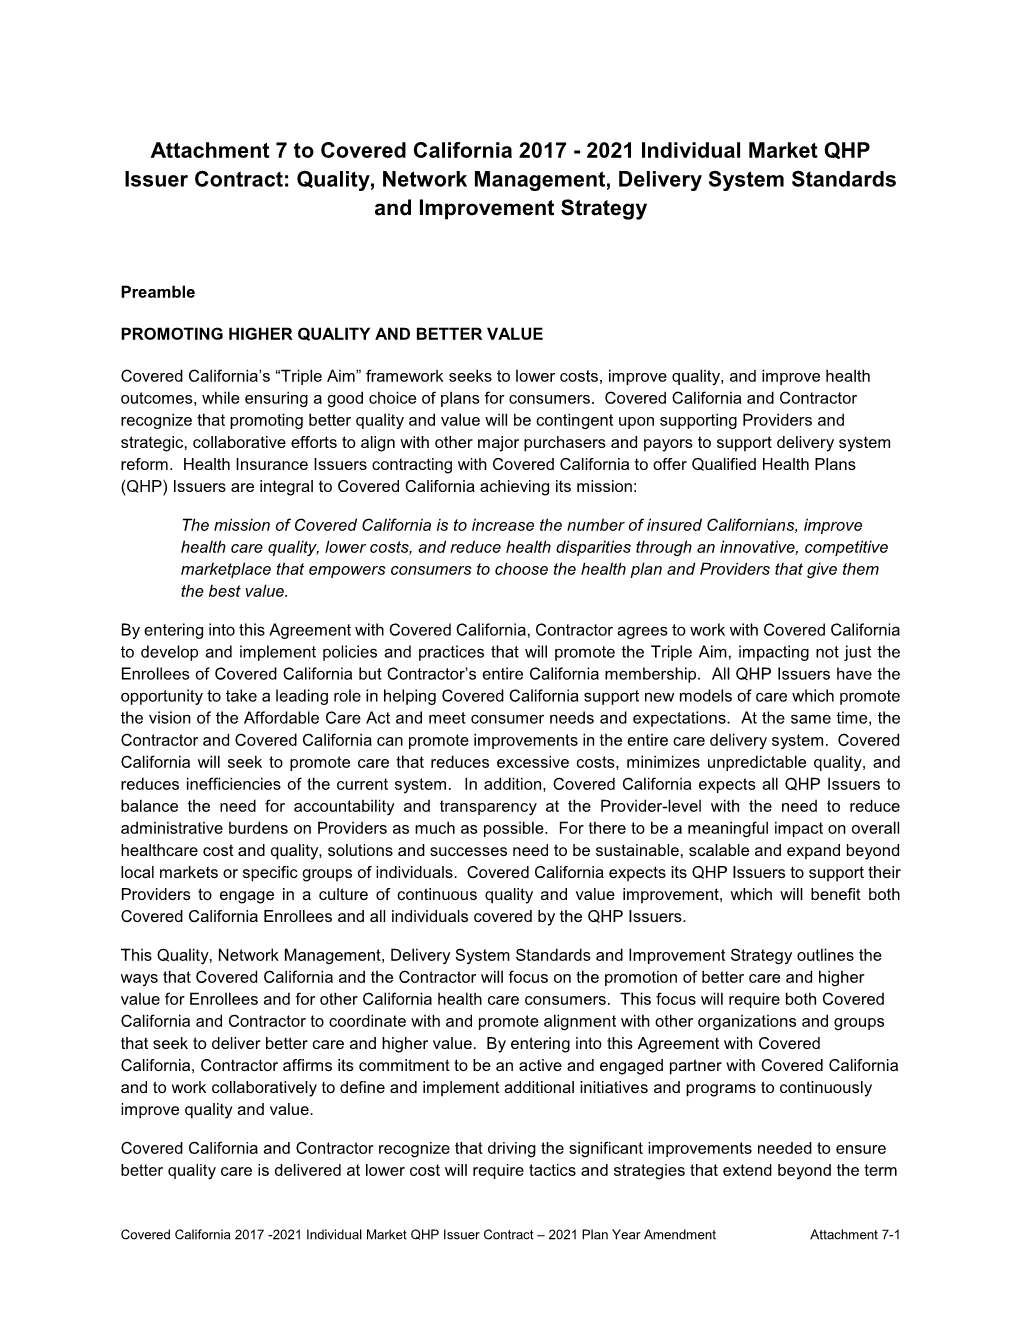 Attachment 7 to Covered California 2017 - 2021 Individual Market QHP Issuer Contract: Quality, Network Management, Delivery System Standards and Improvement Strategy